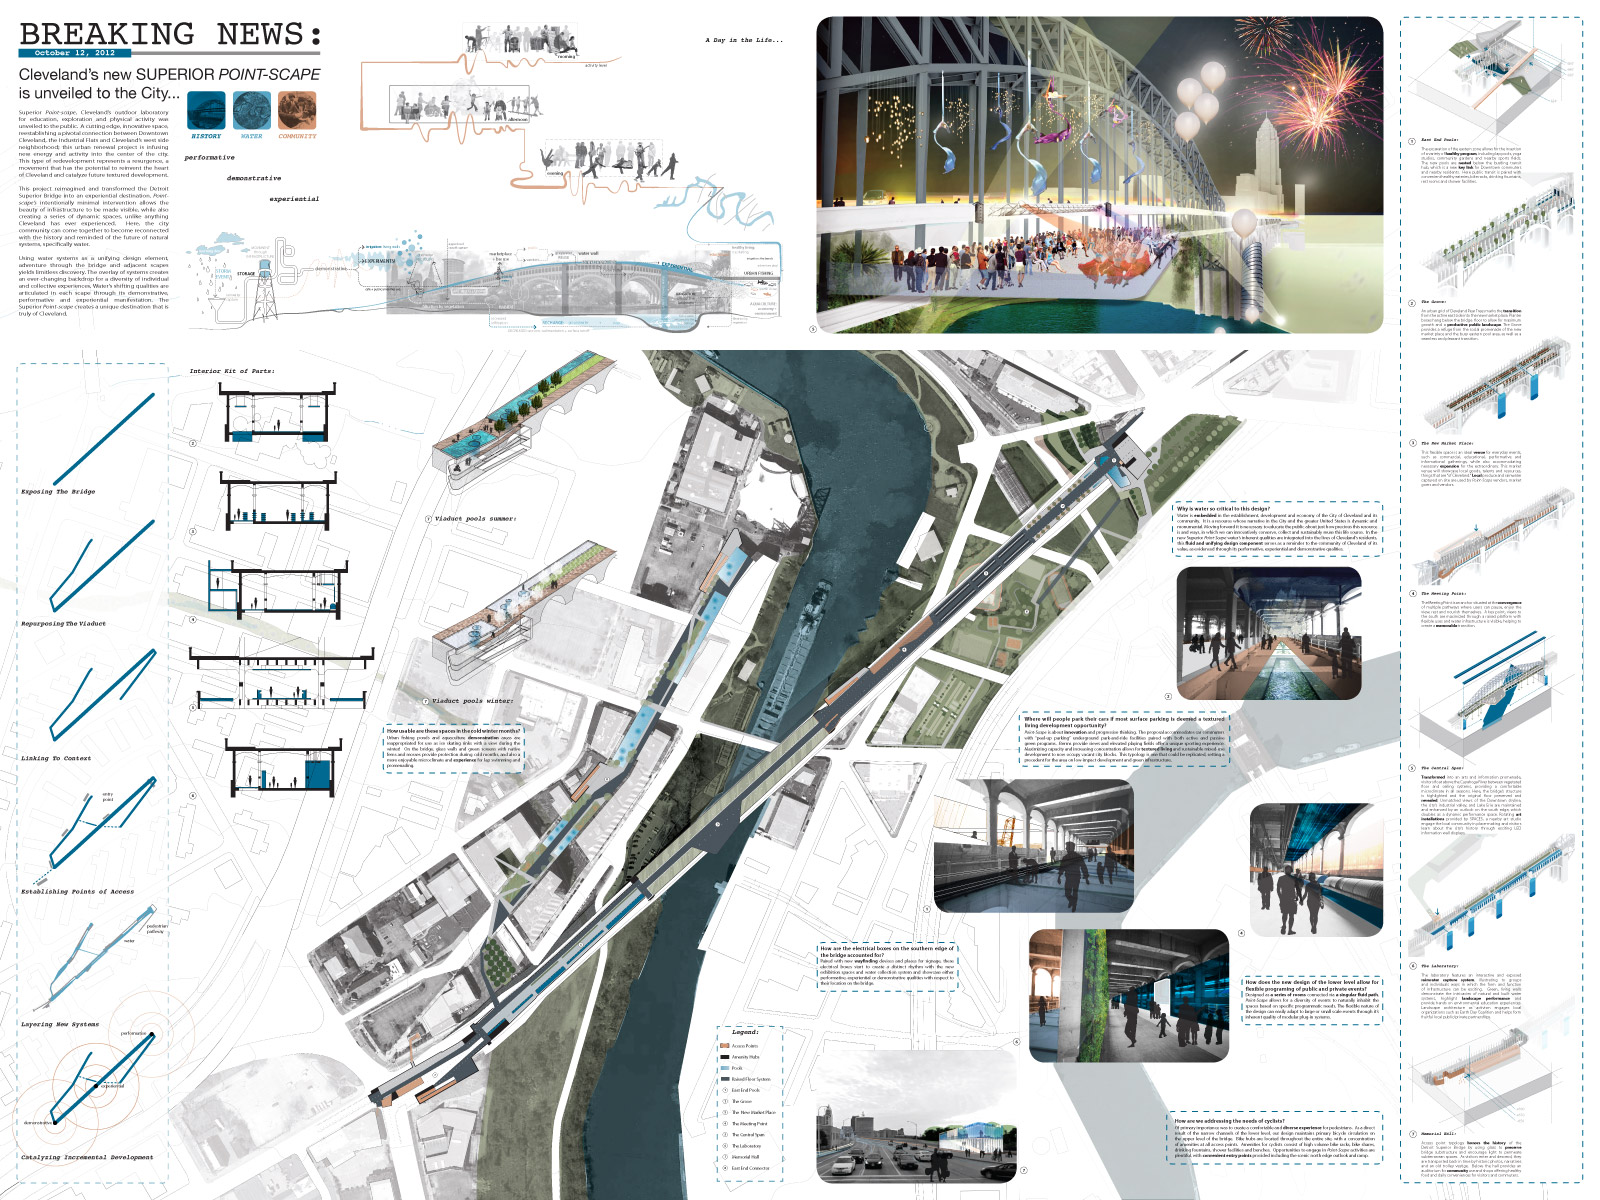 Two Designs Take First at 2012 Cleveland Design Competition